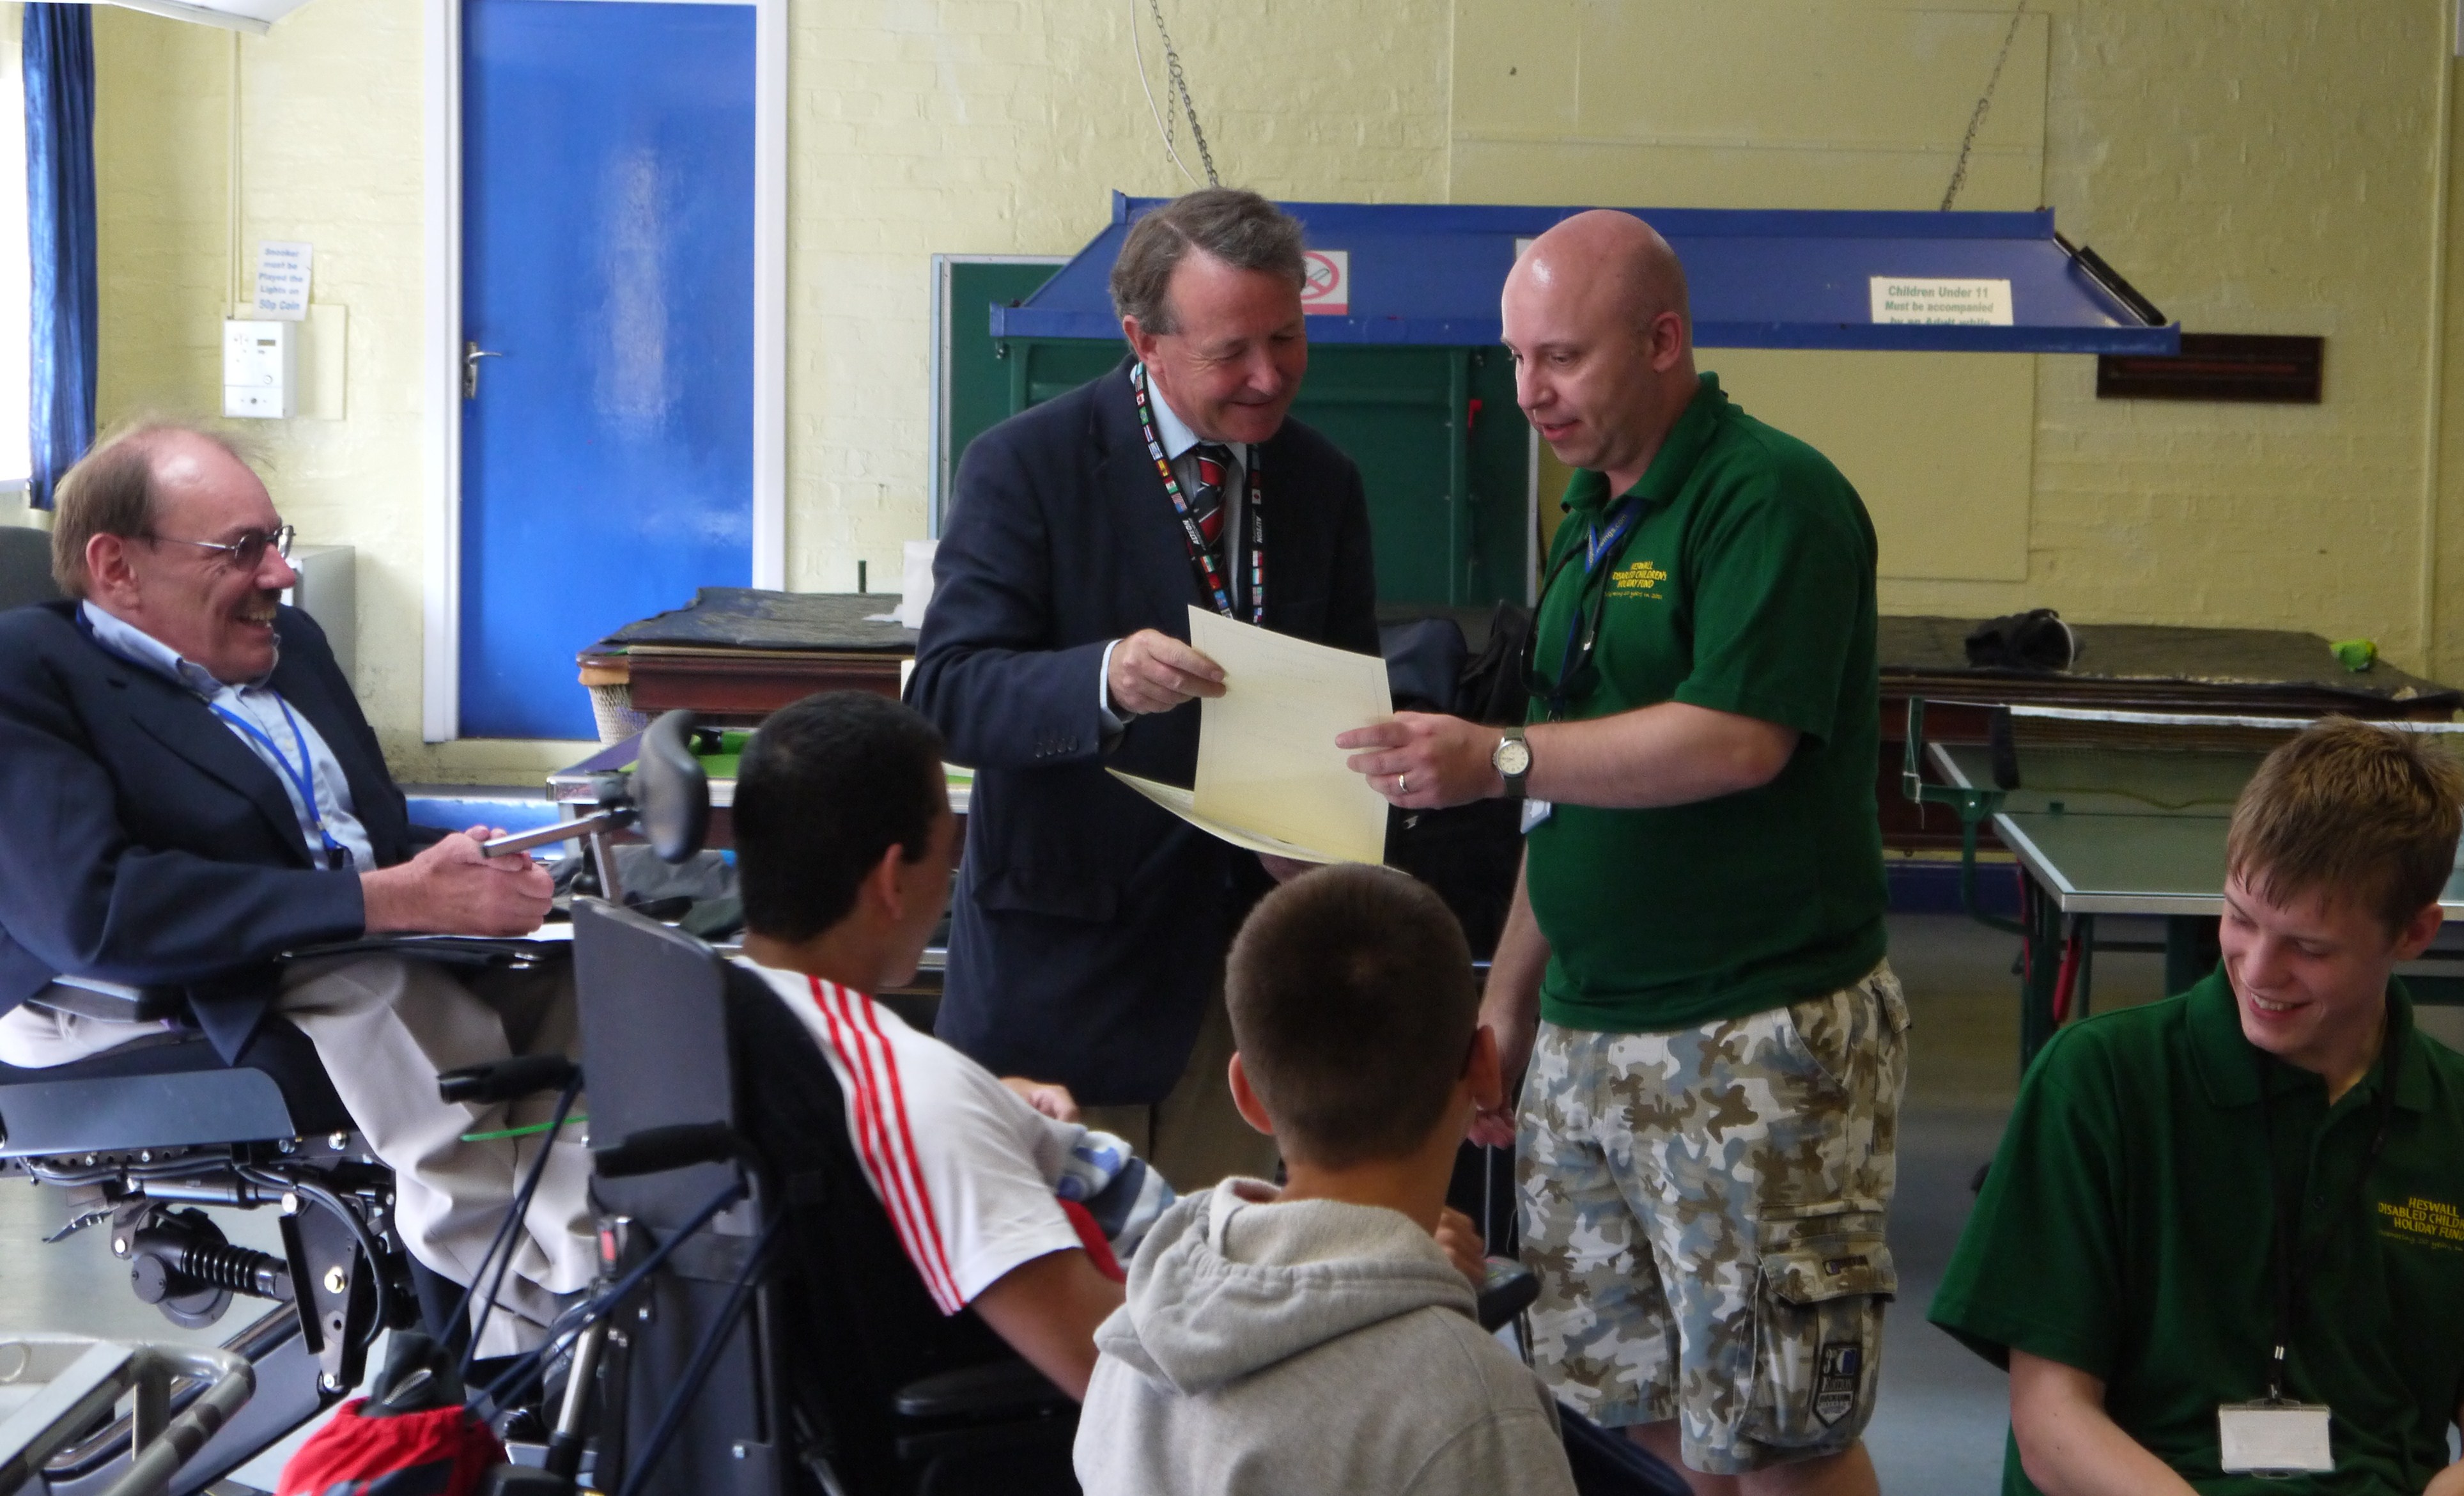 Sir Bert Massie CBE and David Alton with some of the Heswall Holiday Camp Volunteers, 2013